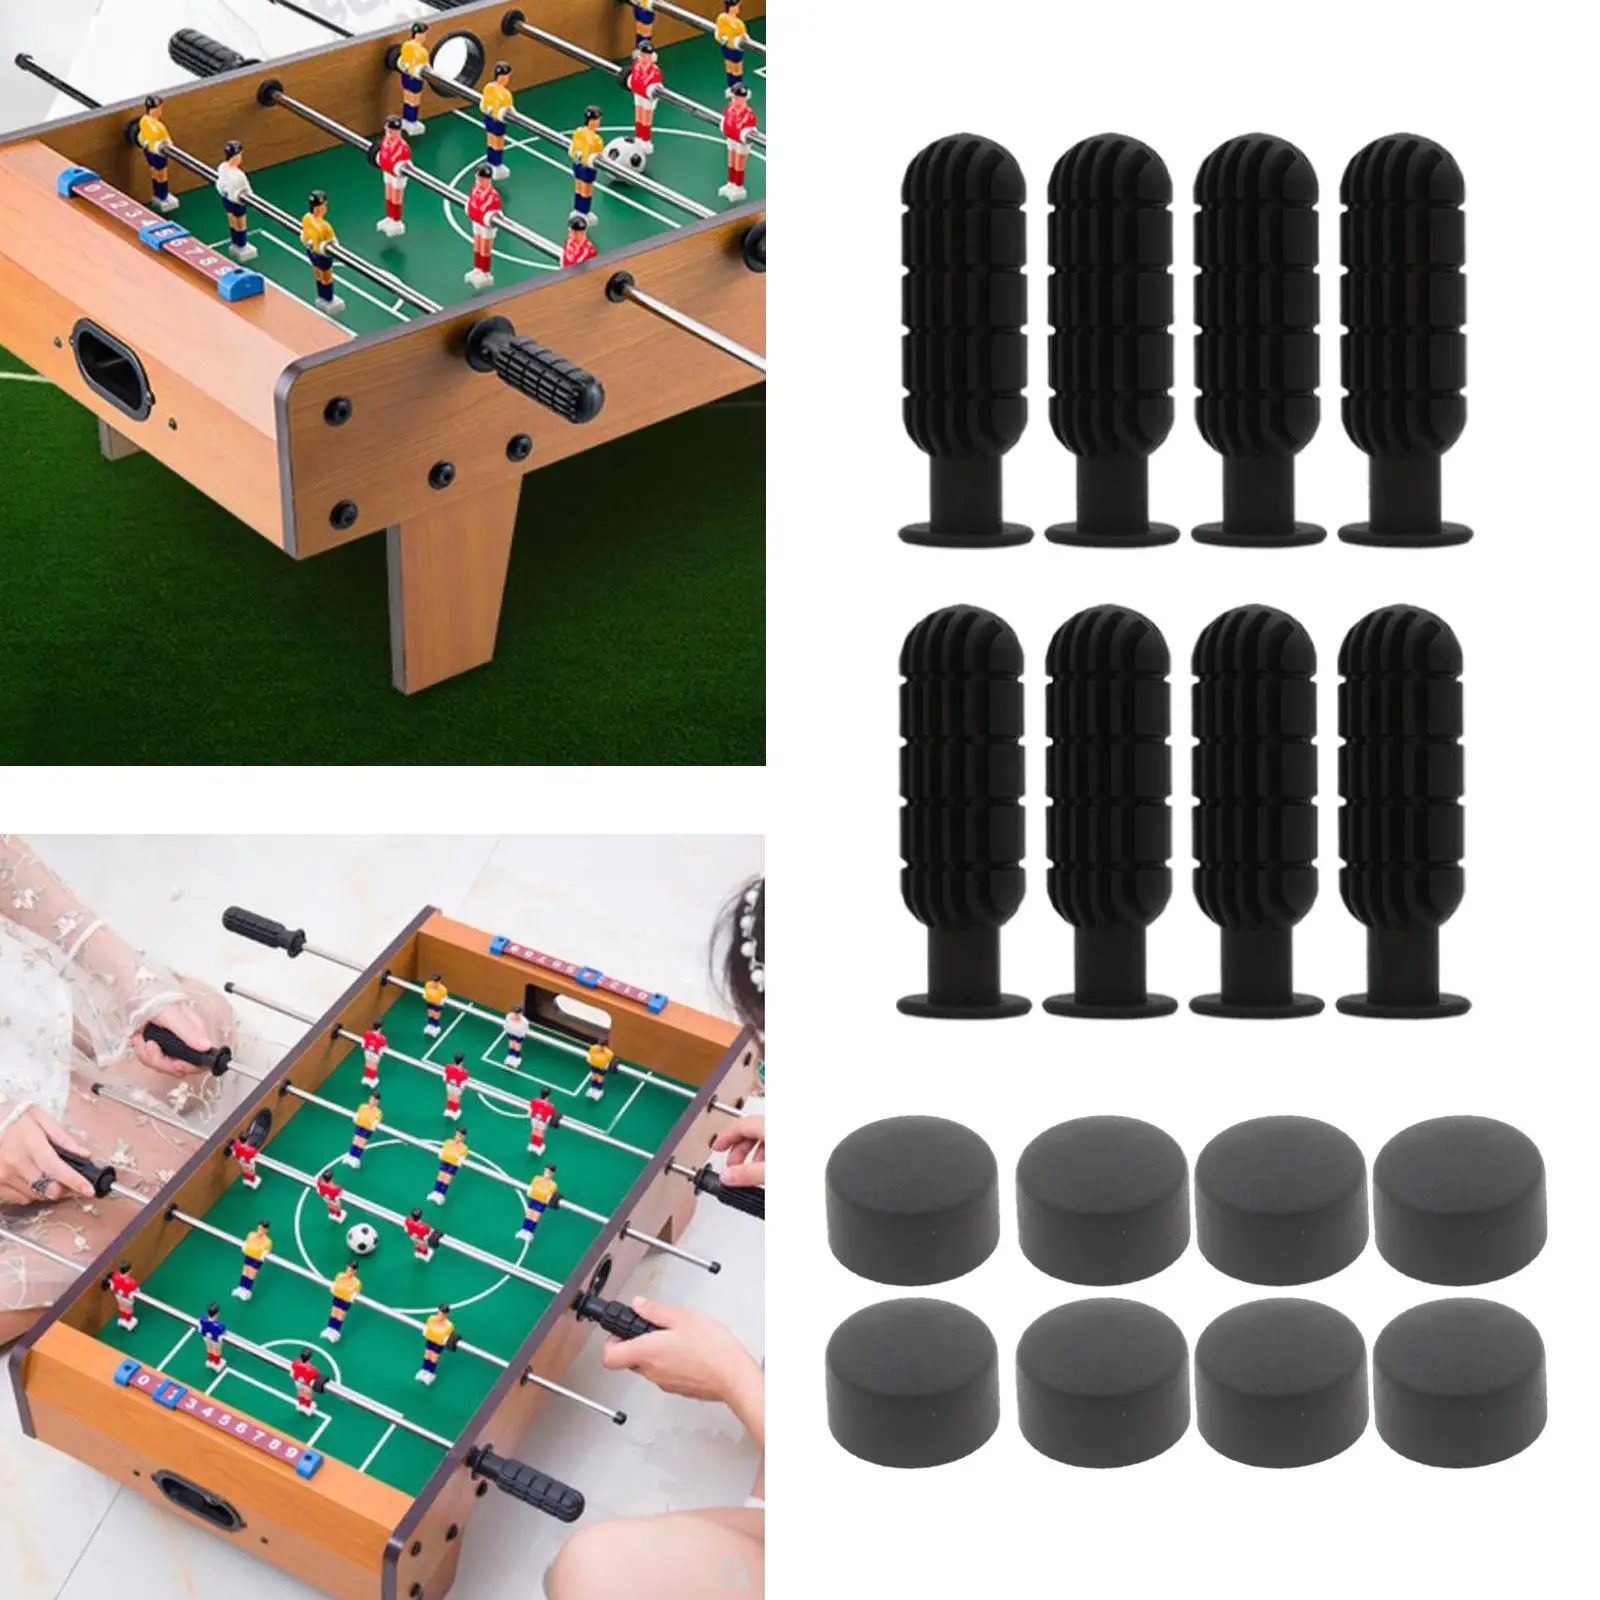 8 Pairs Durable Foosball Handle Replace Table Soccer Game Black Handle Grips End